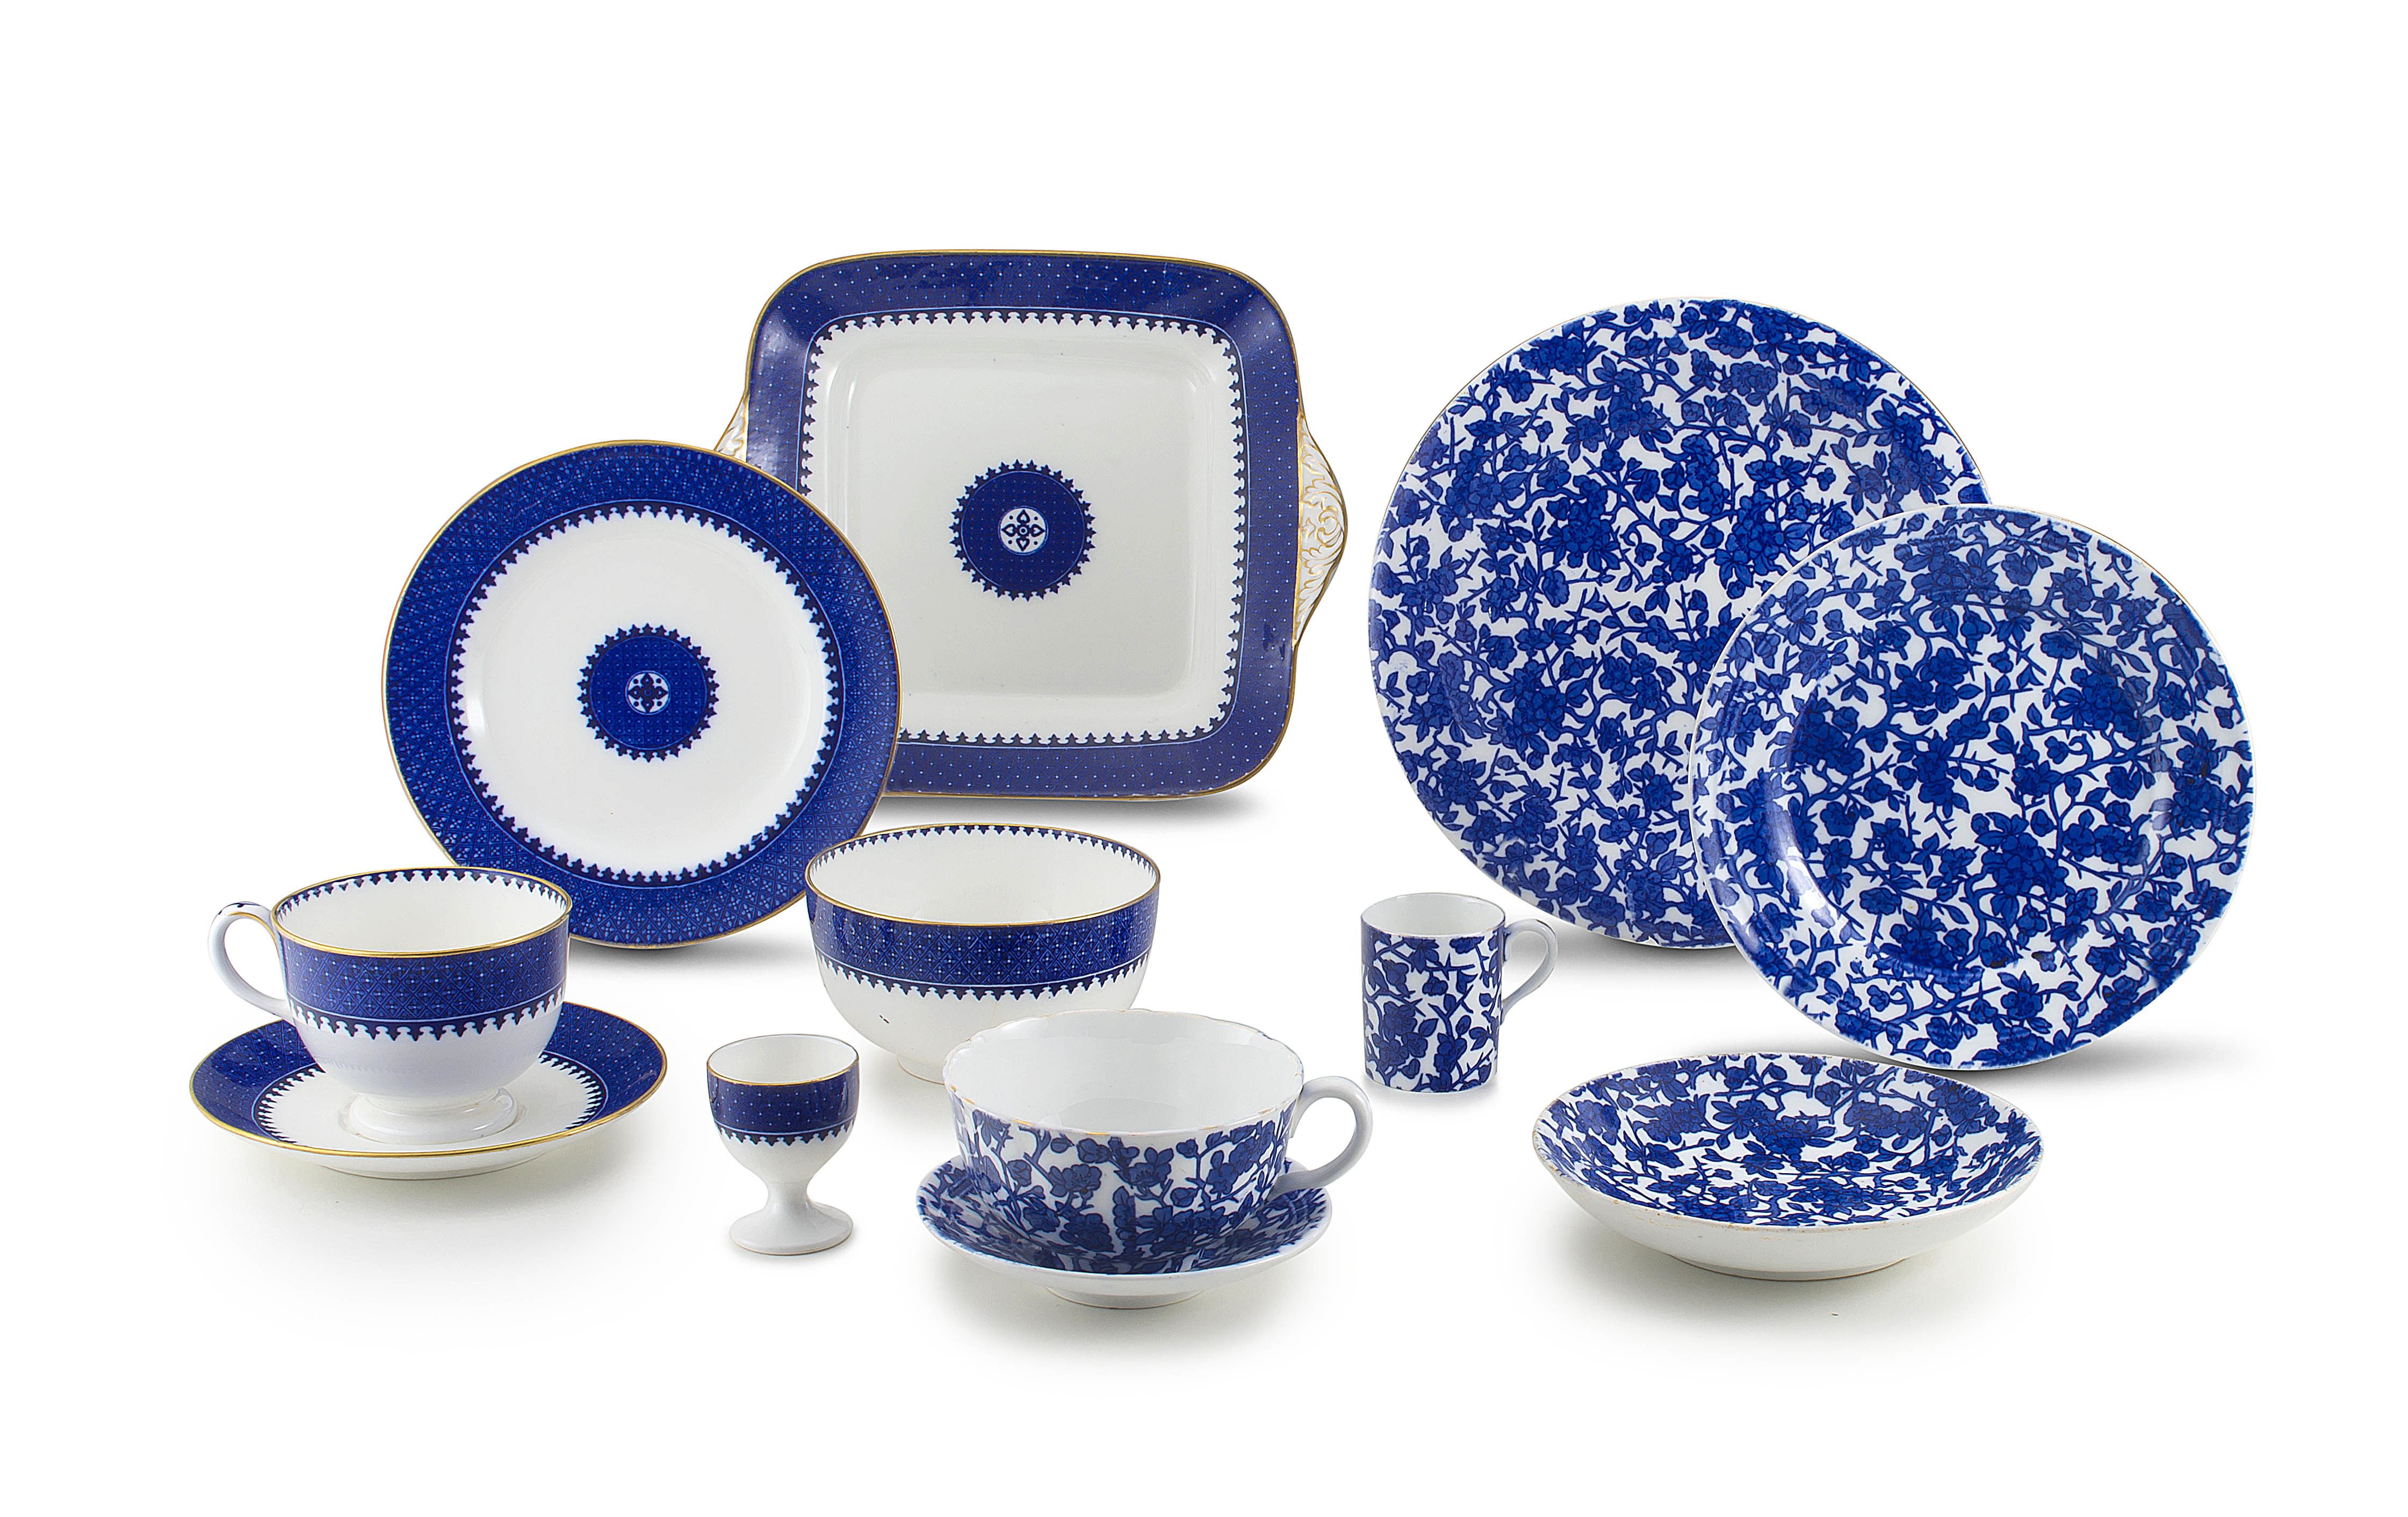 A Wedgwood blue and white part breakfast set, circa 1900